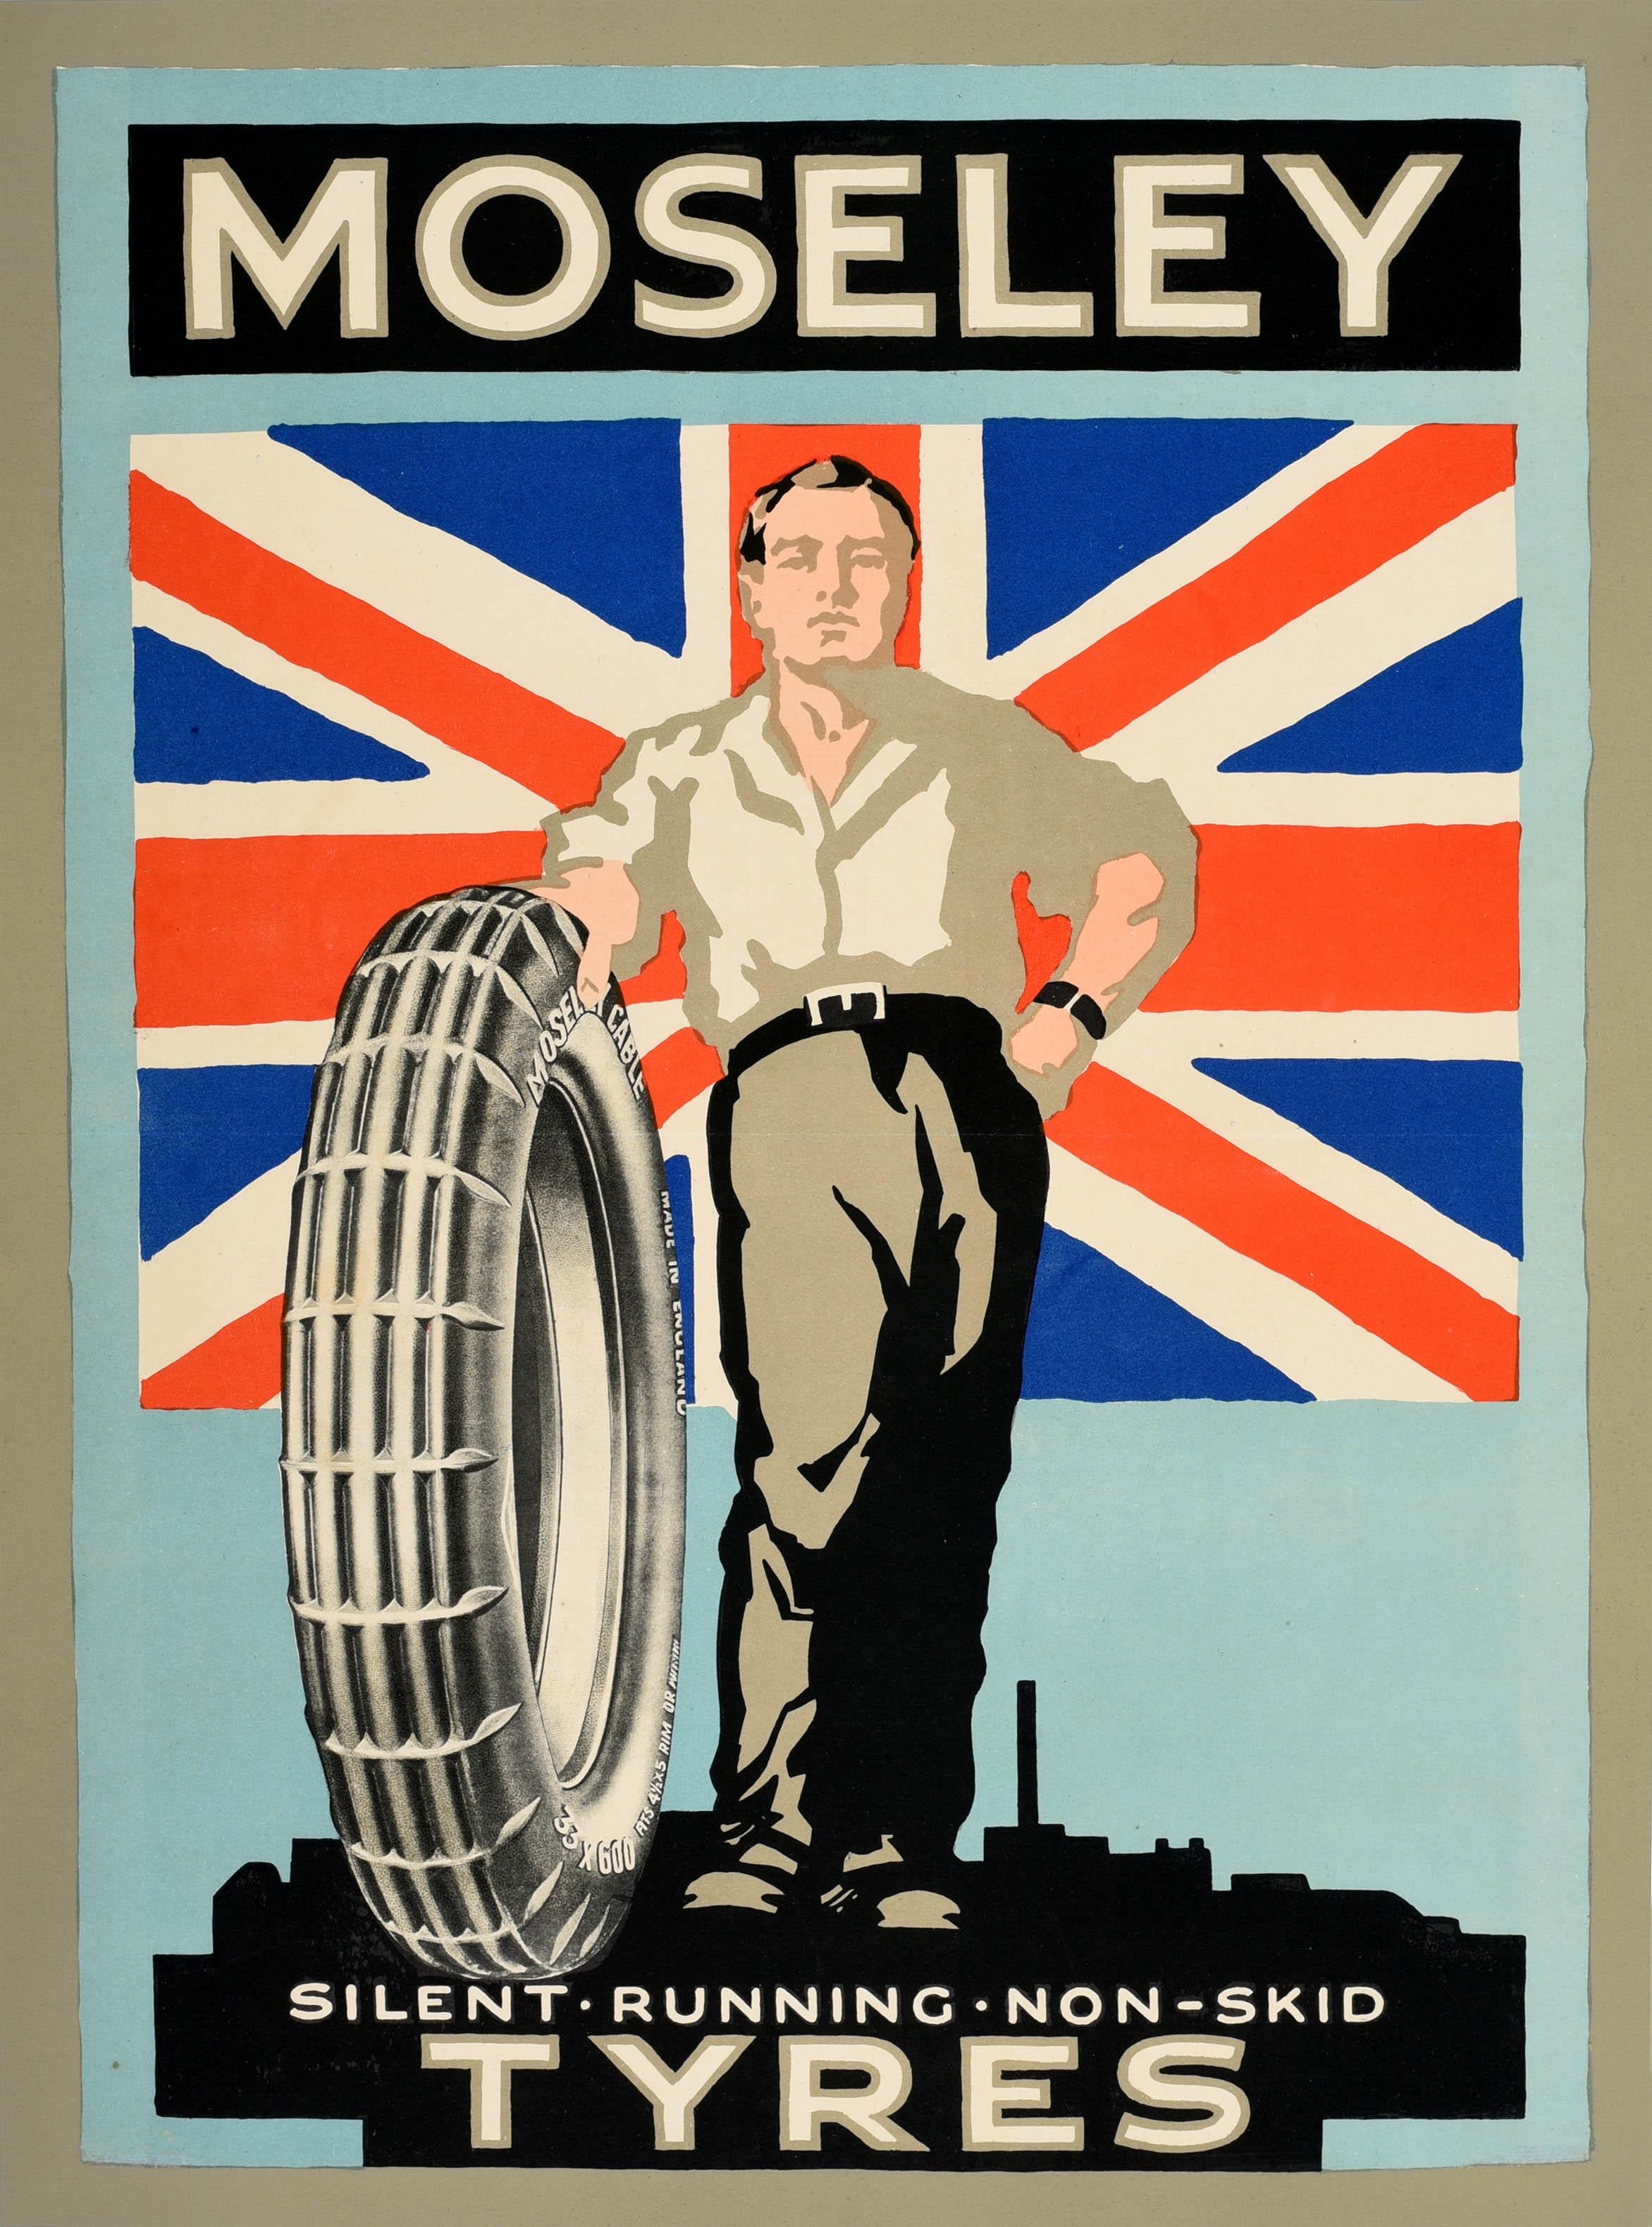 Unknown Print - Original Vintage Poster Moseley Silent Running Non Skid Tyres UK Flag Factory